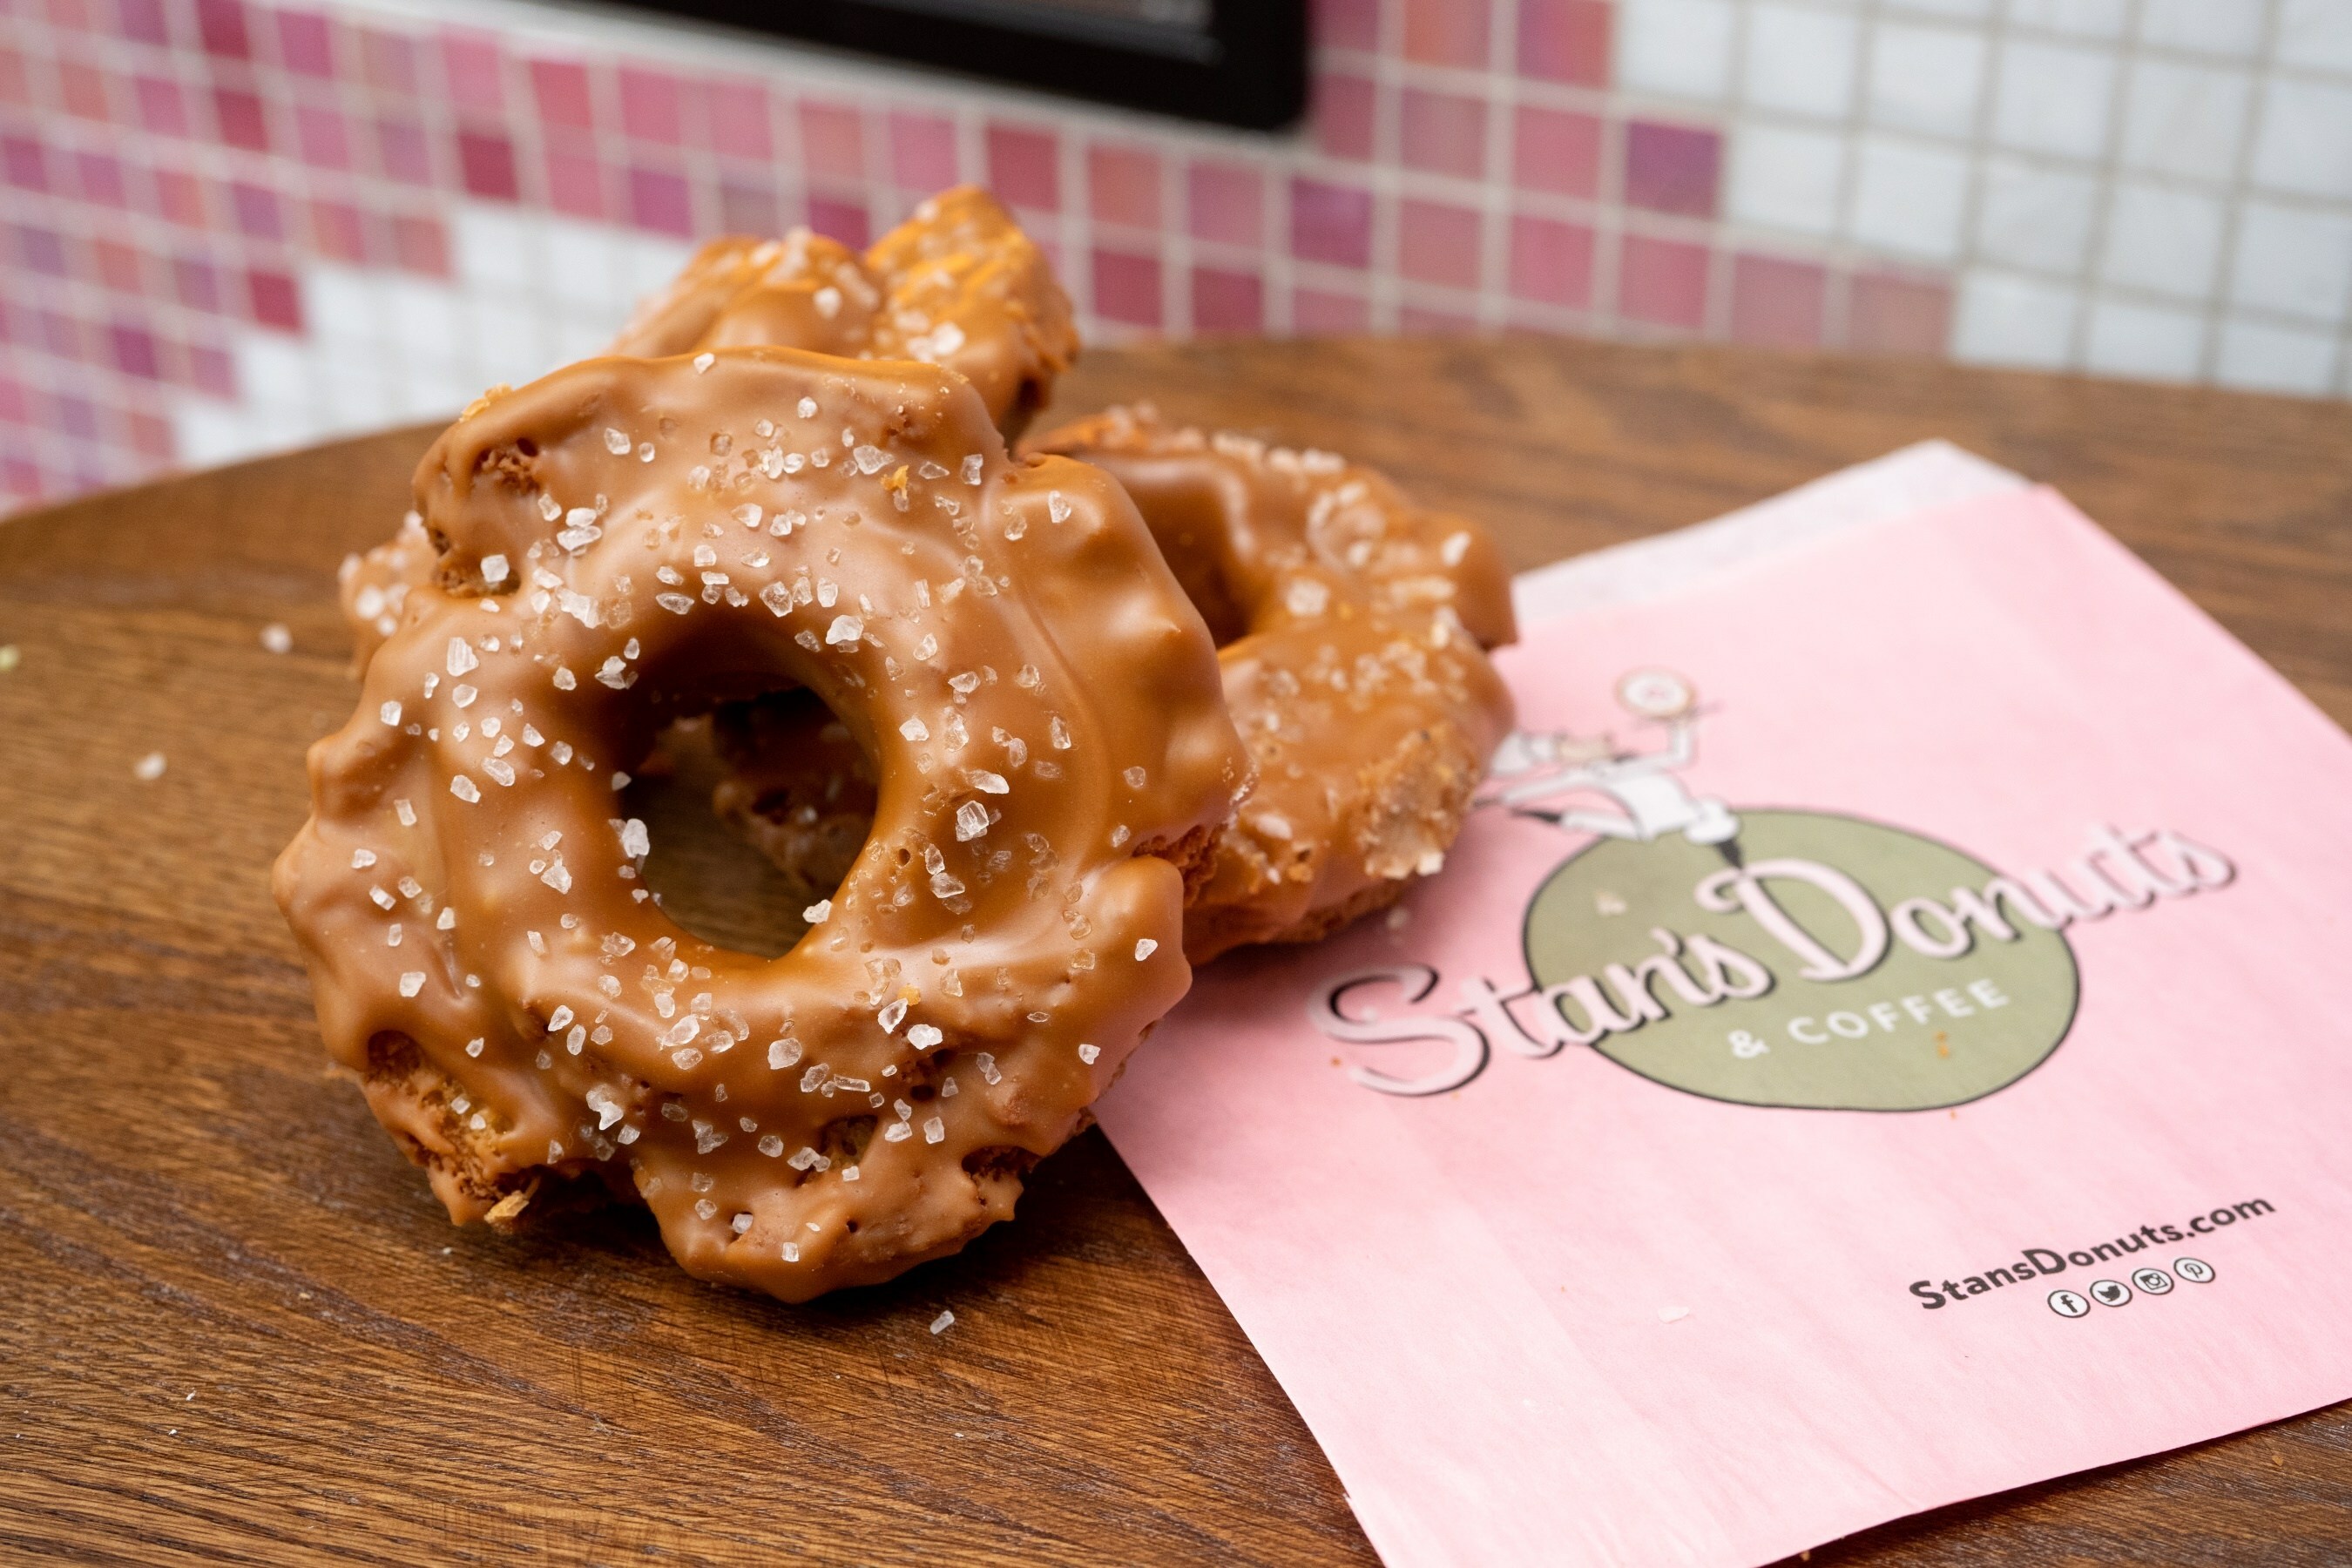 Stan’s Donuts and Morton Salt Team Up to Create a Salted Carmel Old Fashioned Donut – NBC Chicago